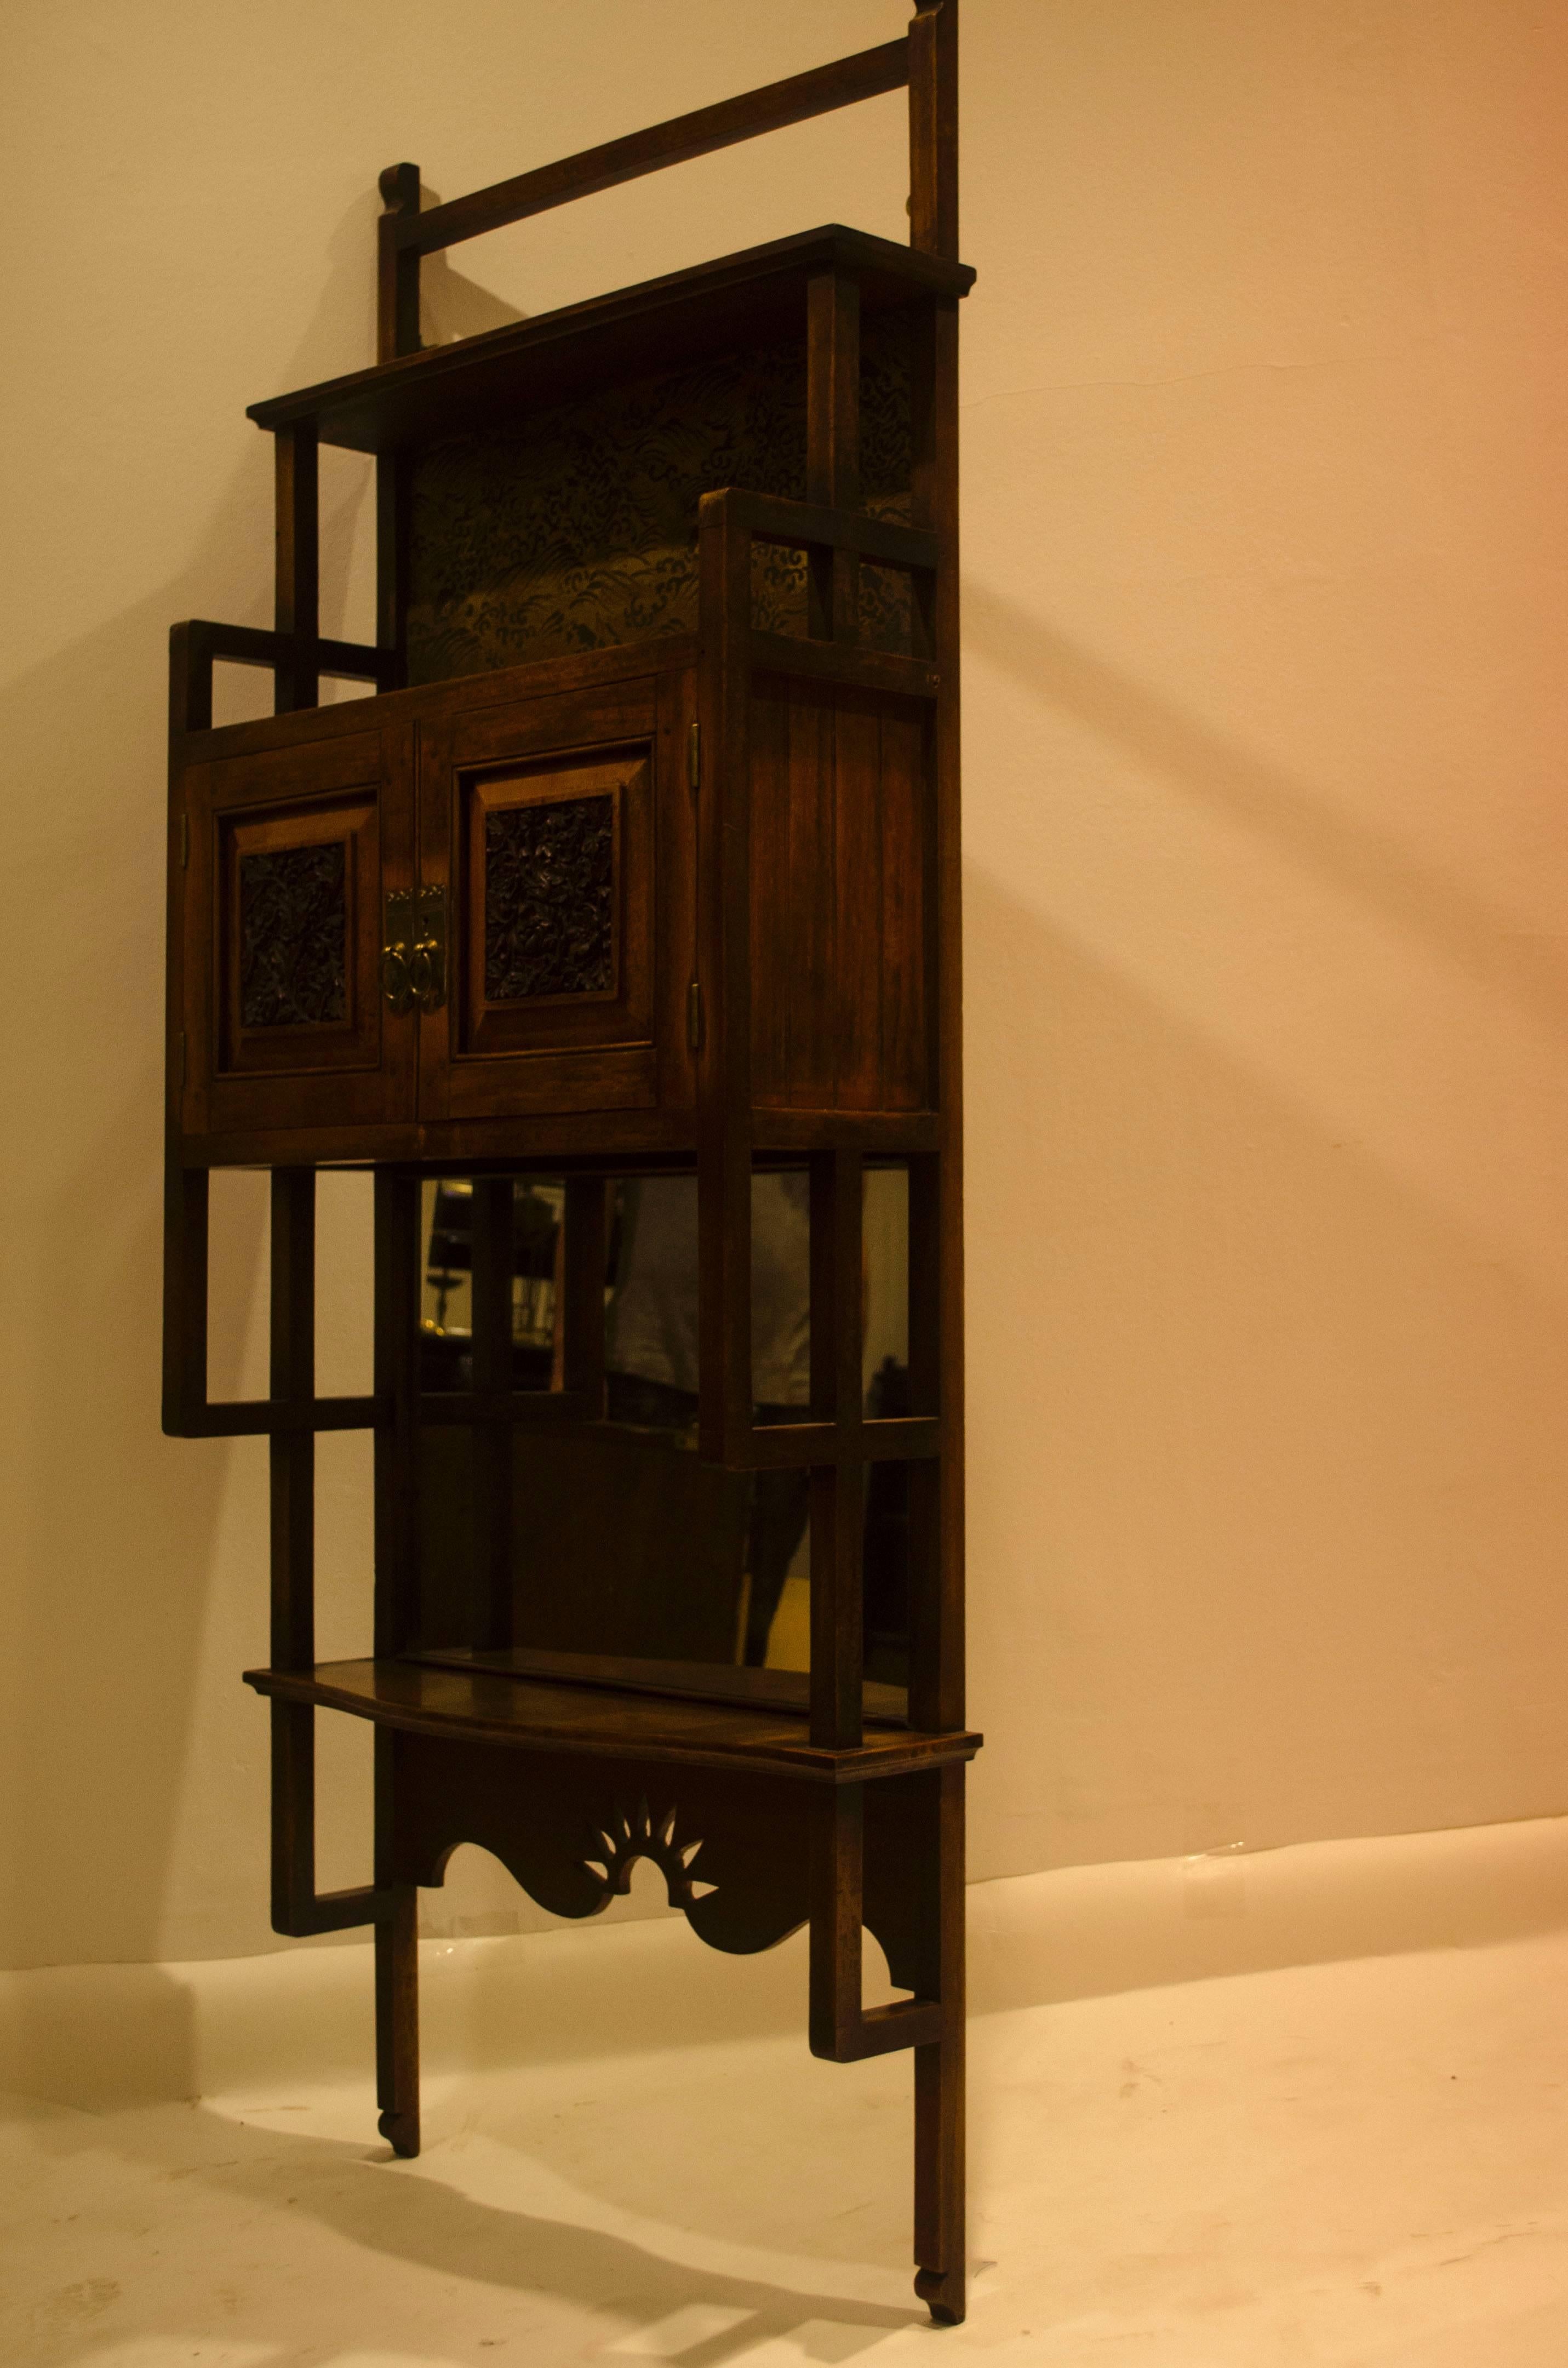 Made by The Bombay Art Furnishing Establishment
A rare set of Anglo-Japanese walnut wall shelves with ebonized and gilt-painted Japanese Carp to the upper panel, finely carved stylized floral details to the doors with a shaped shelf, and a mirror